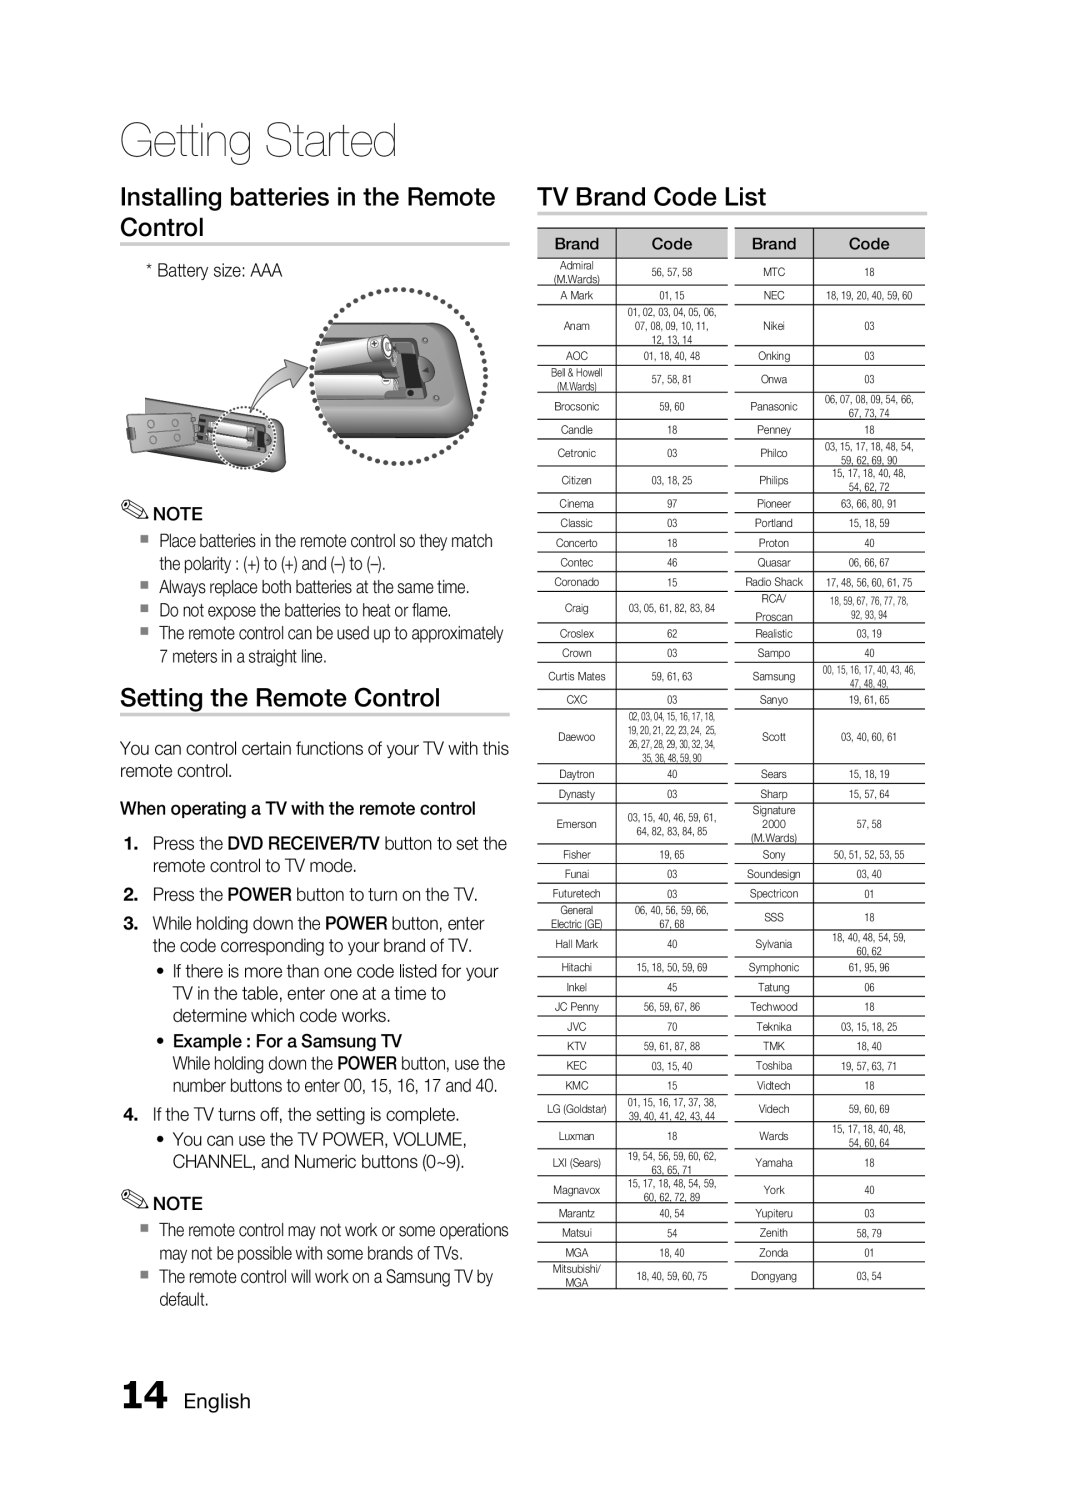 Samsung HT-C455N/HAC Installing batteries in the Remote Control, TV Brand Code List, Setting the Remote Control, English 